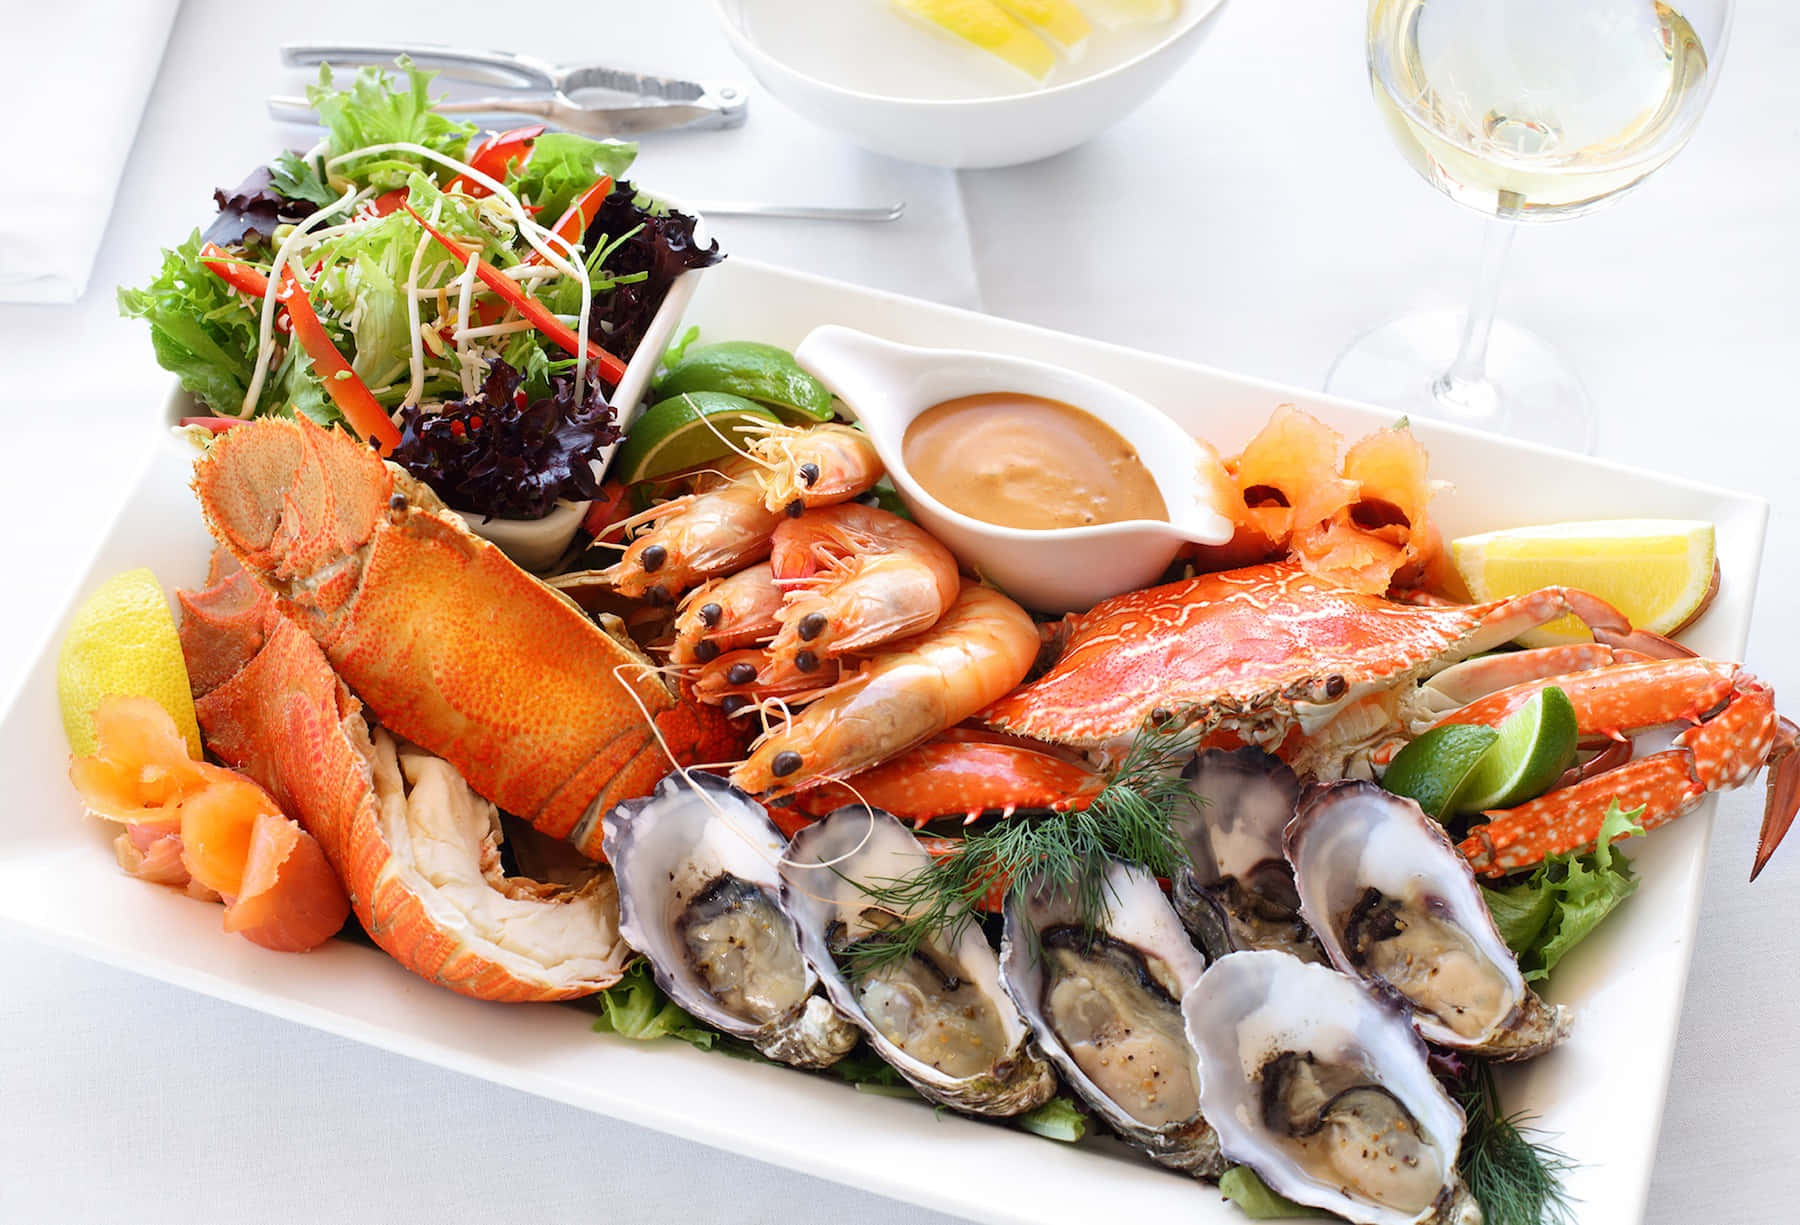 Enjoy the classic flavors of summer with a flavorful seafood platter featuring grilled salmon and steamed shrimp.